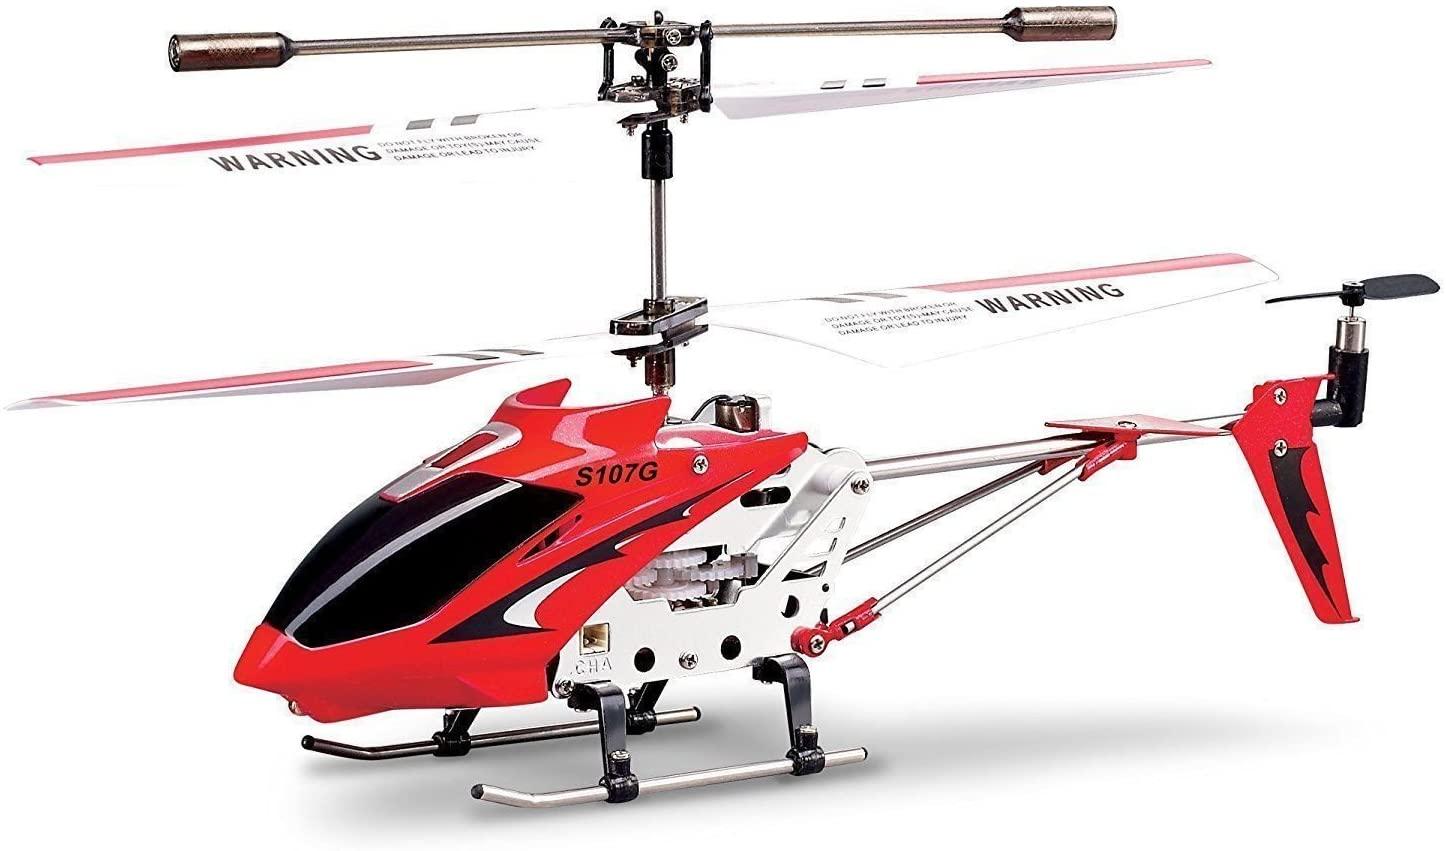 Helicopter Indoor: Comparing Coaxial and Quadcopter Helicopters for Indoor Flying